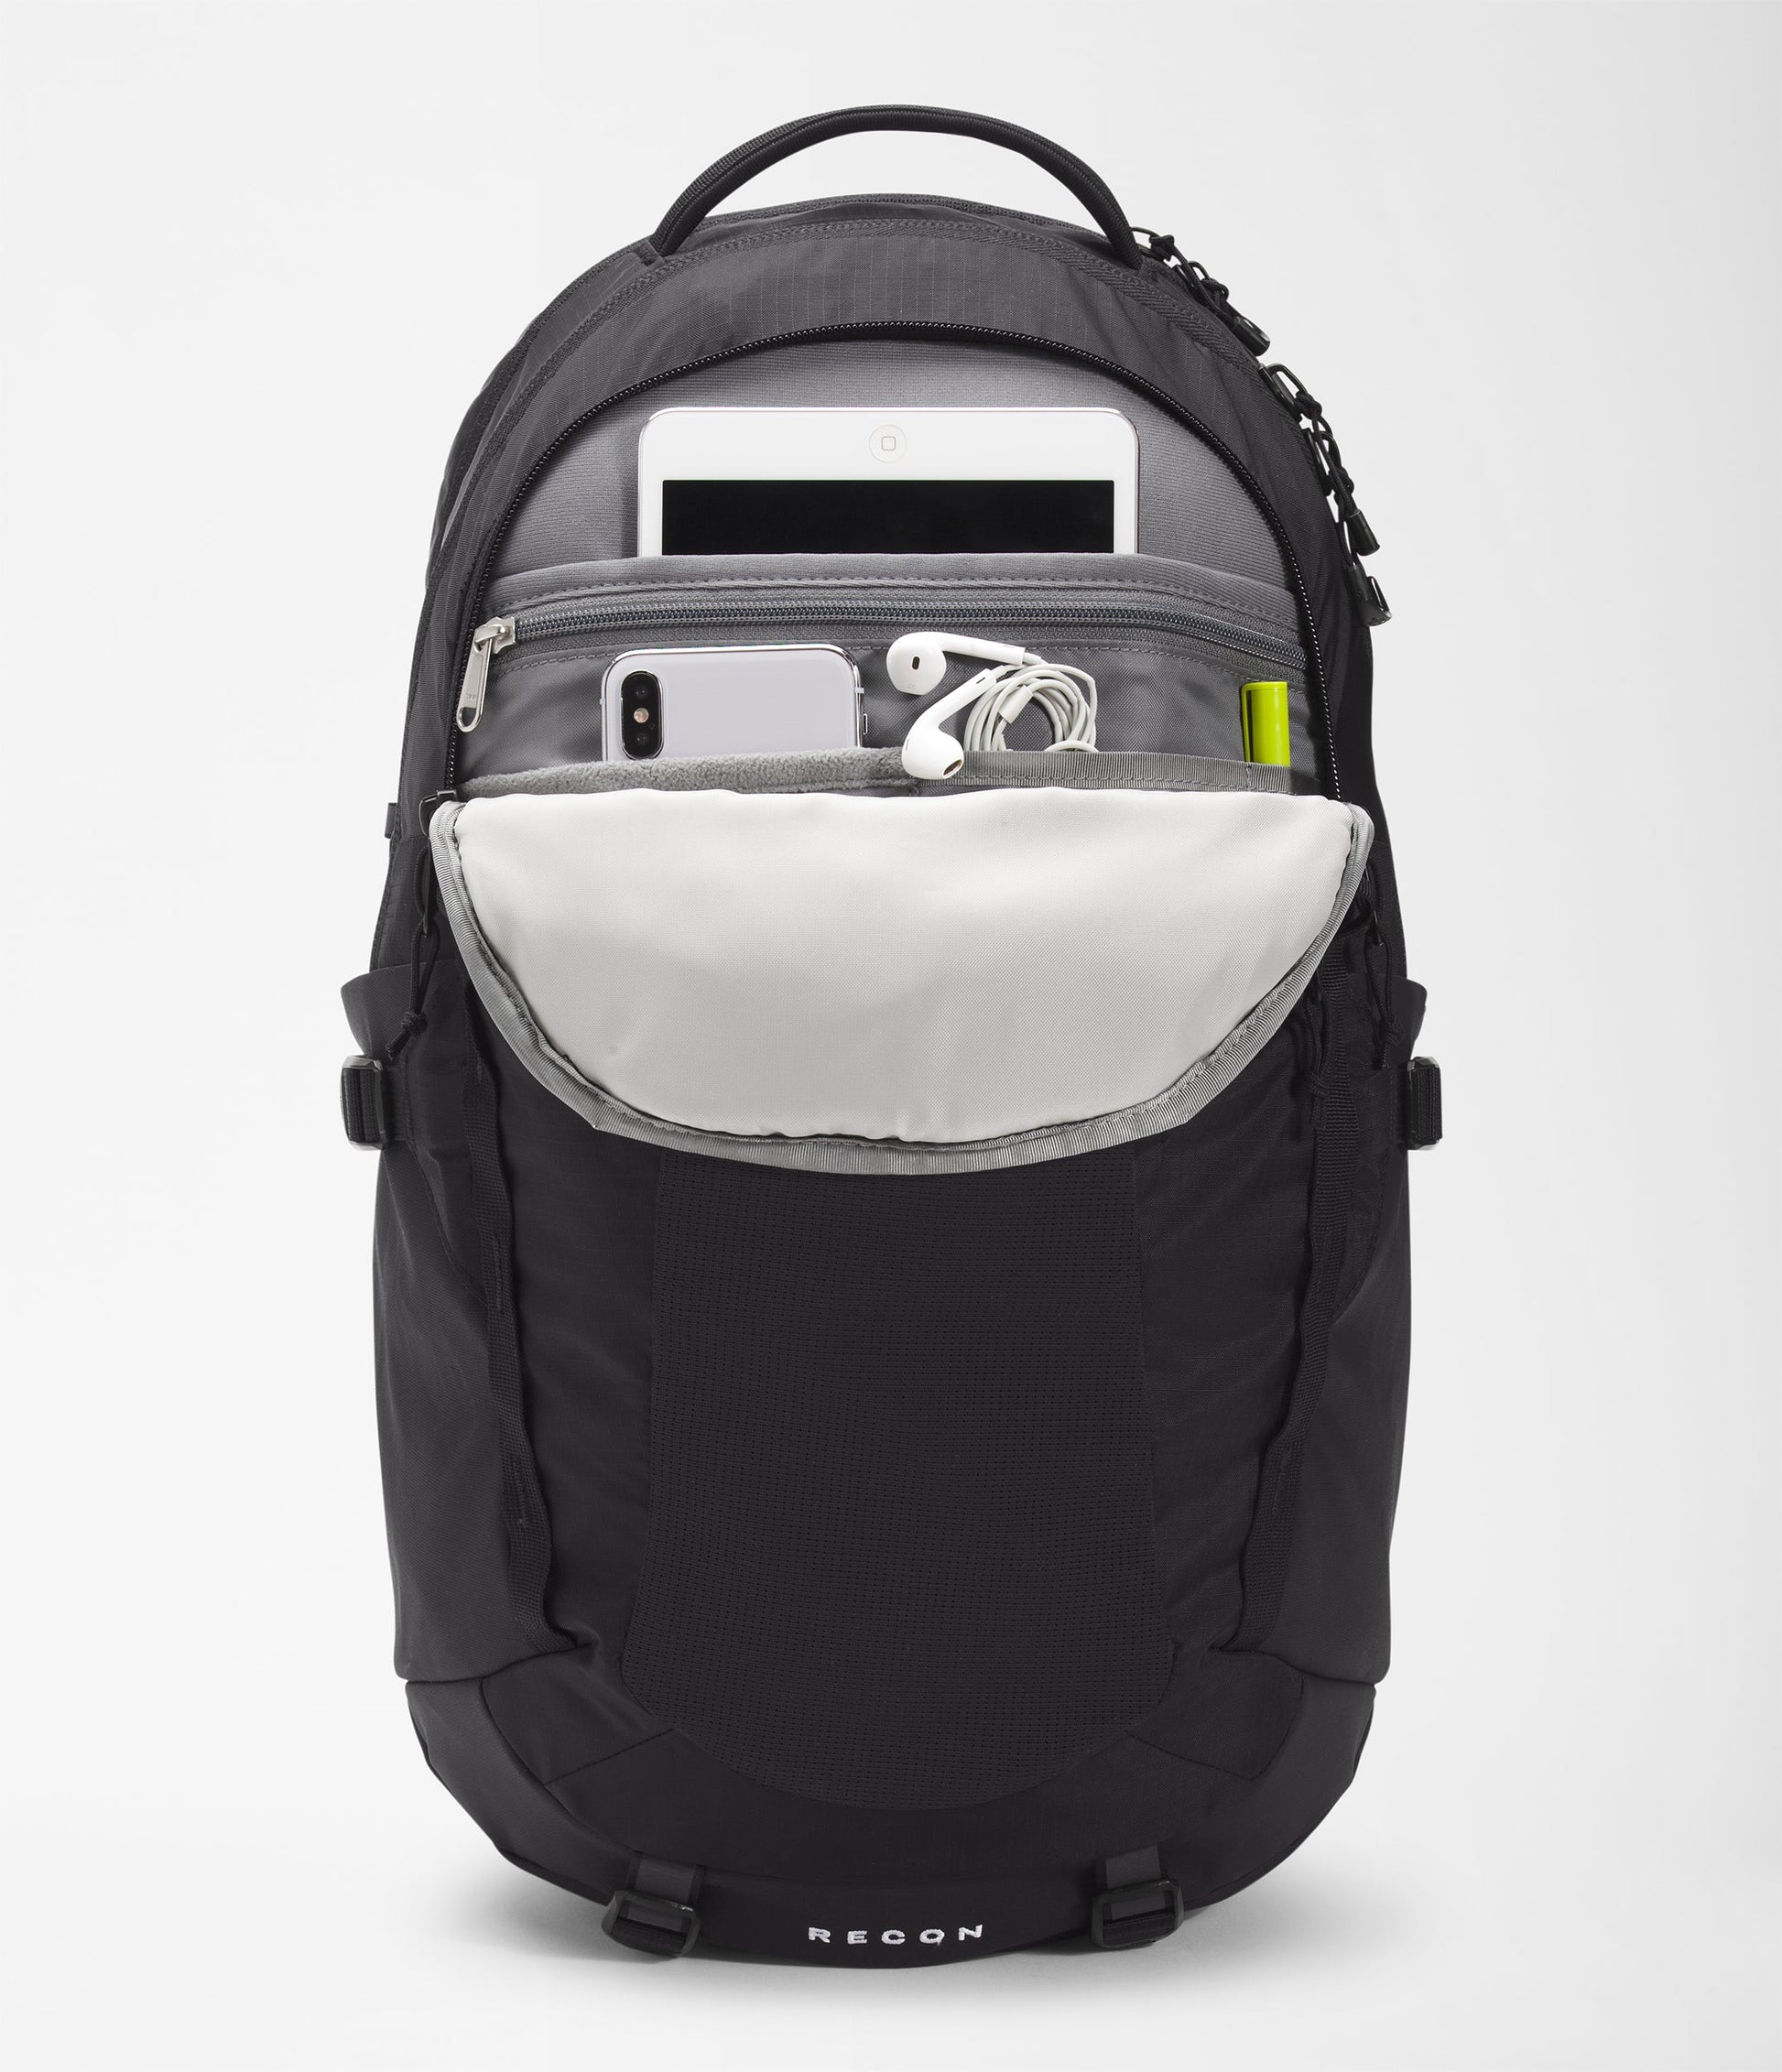 The North Face Women's Recon Backpack